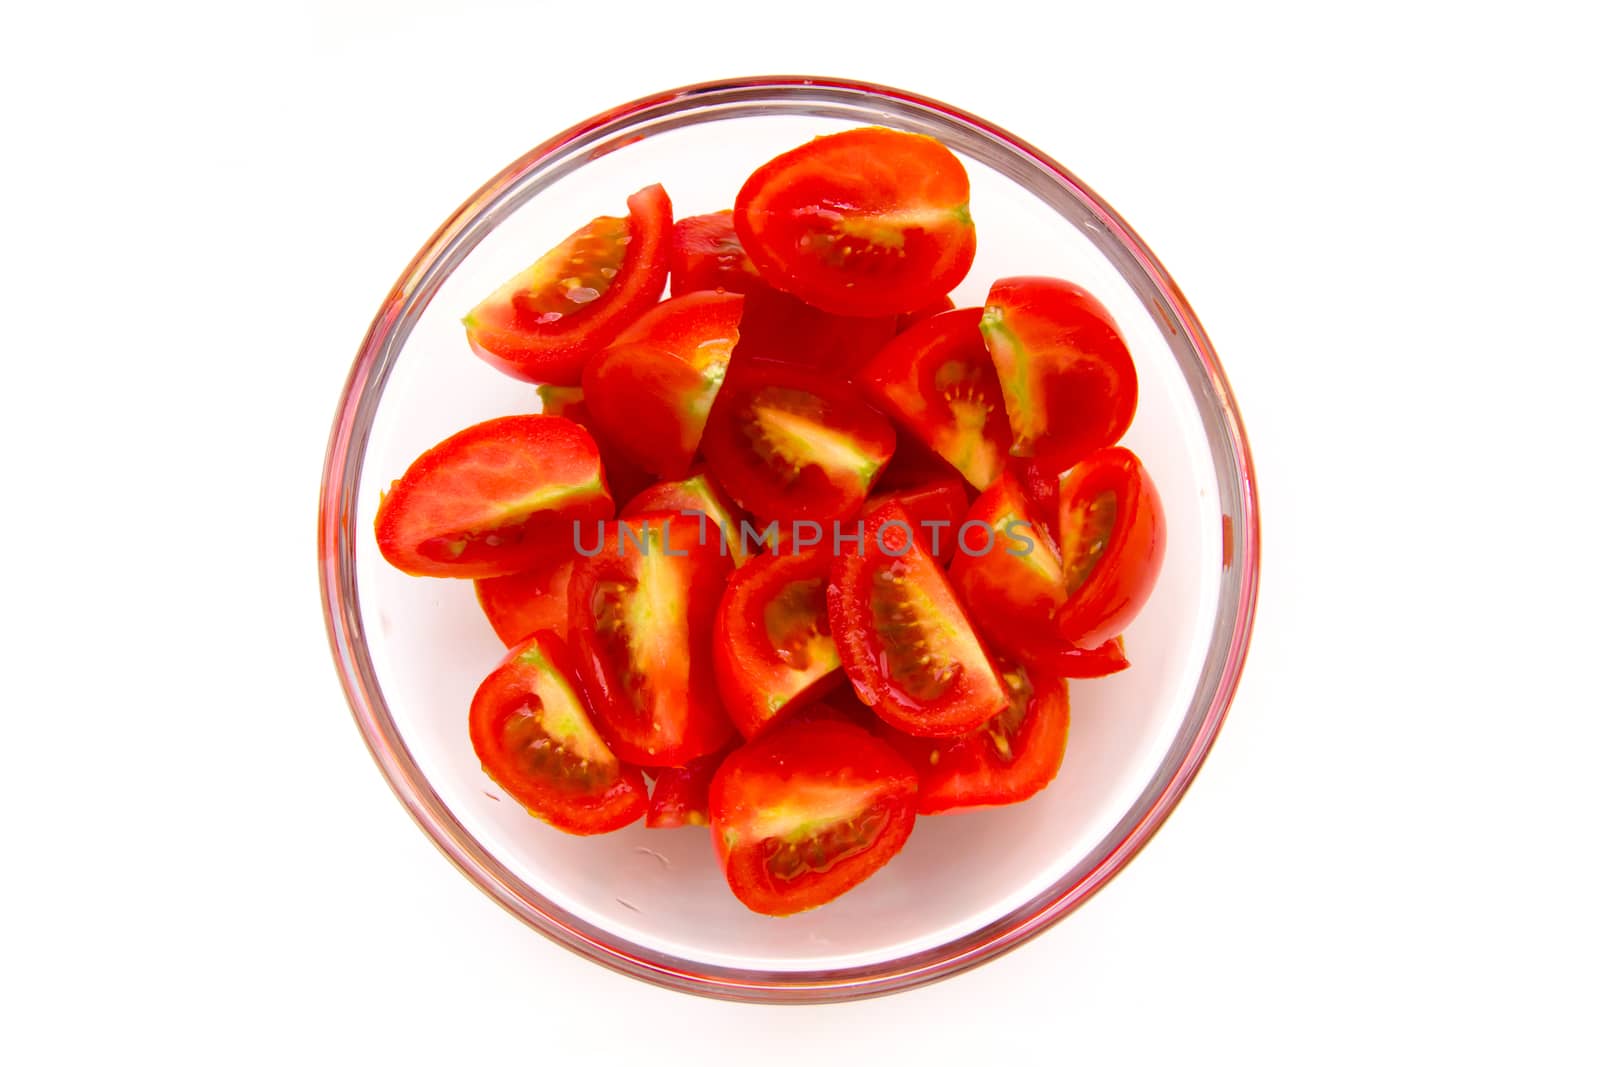 Slices of tomato on bowl on white background seen from above